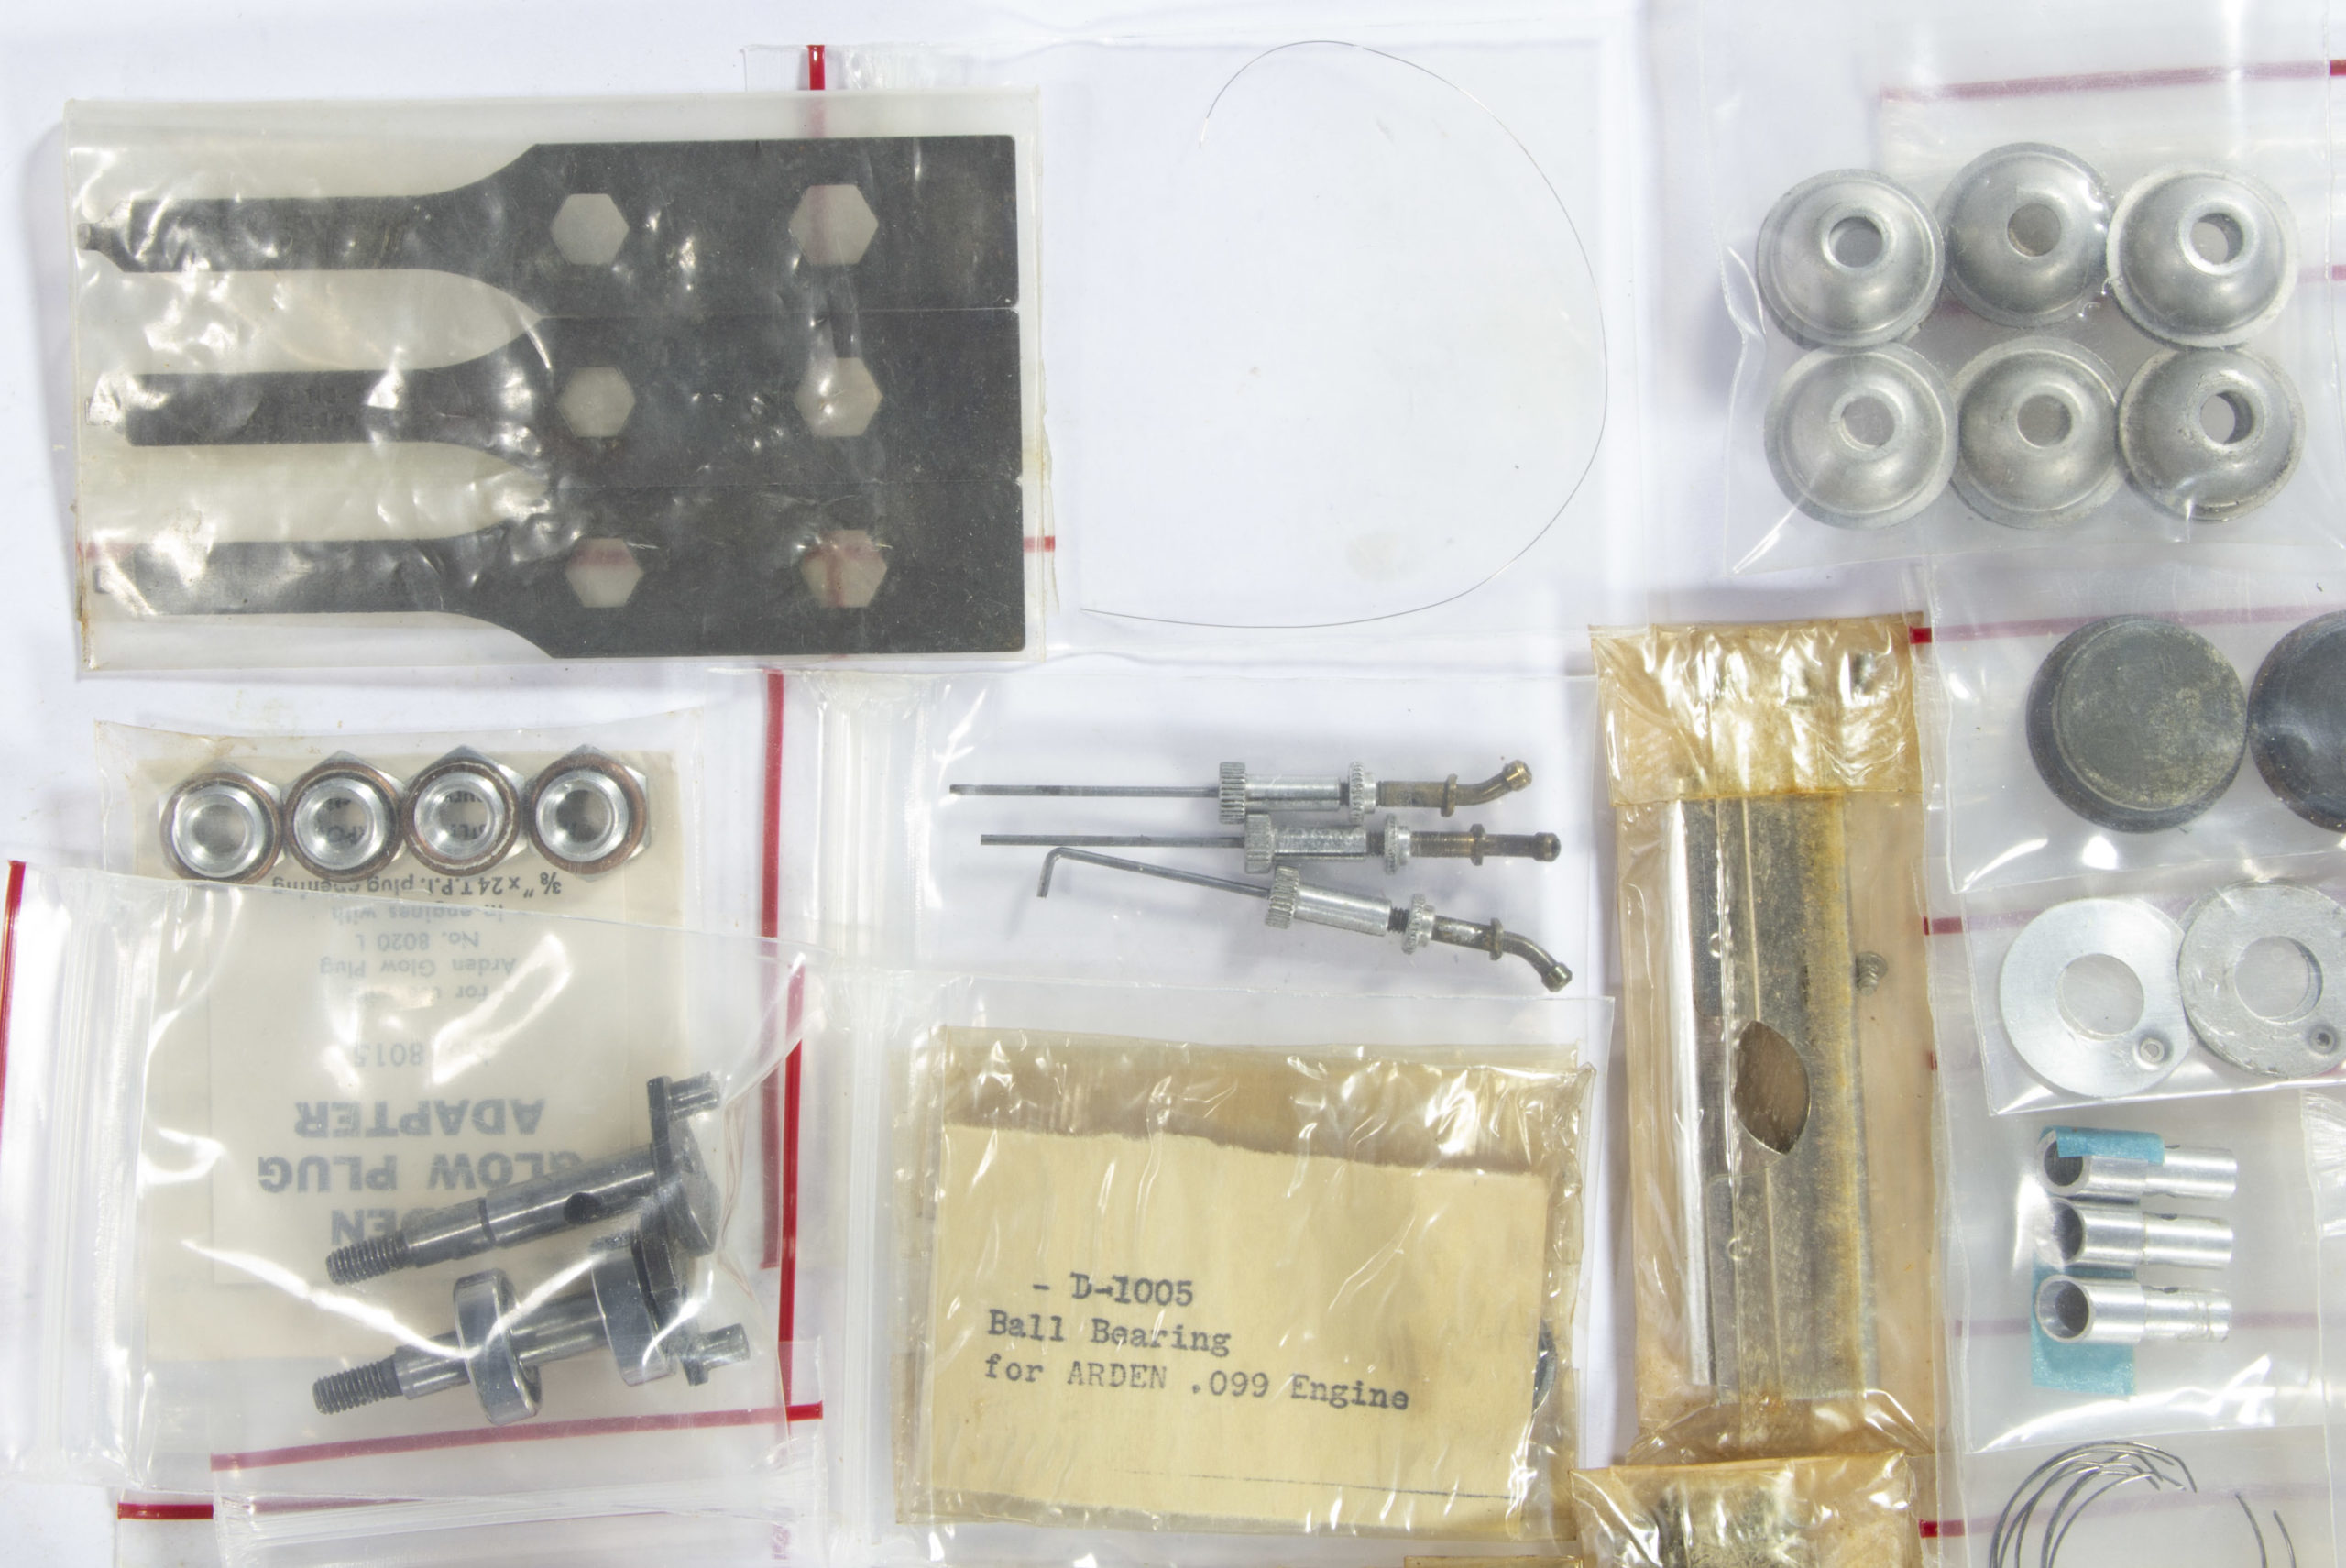 MICRO-BILT INC. ARDEN MODEL NO. 09 AIRPLANE MODEL ENGINES AND PARTS, LOT OF 42,